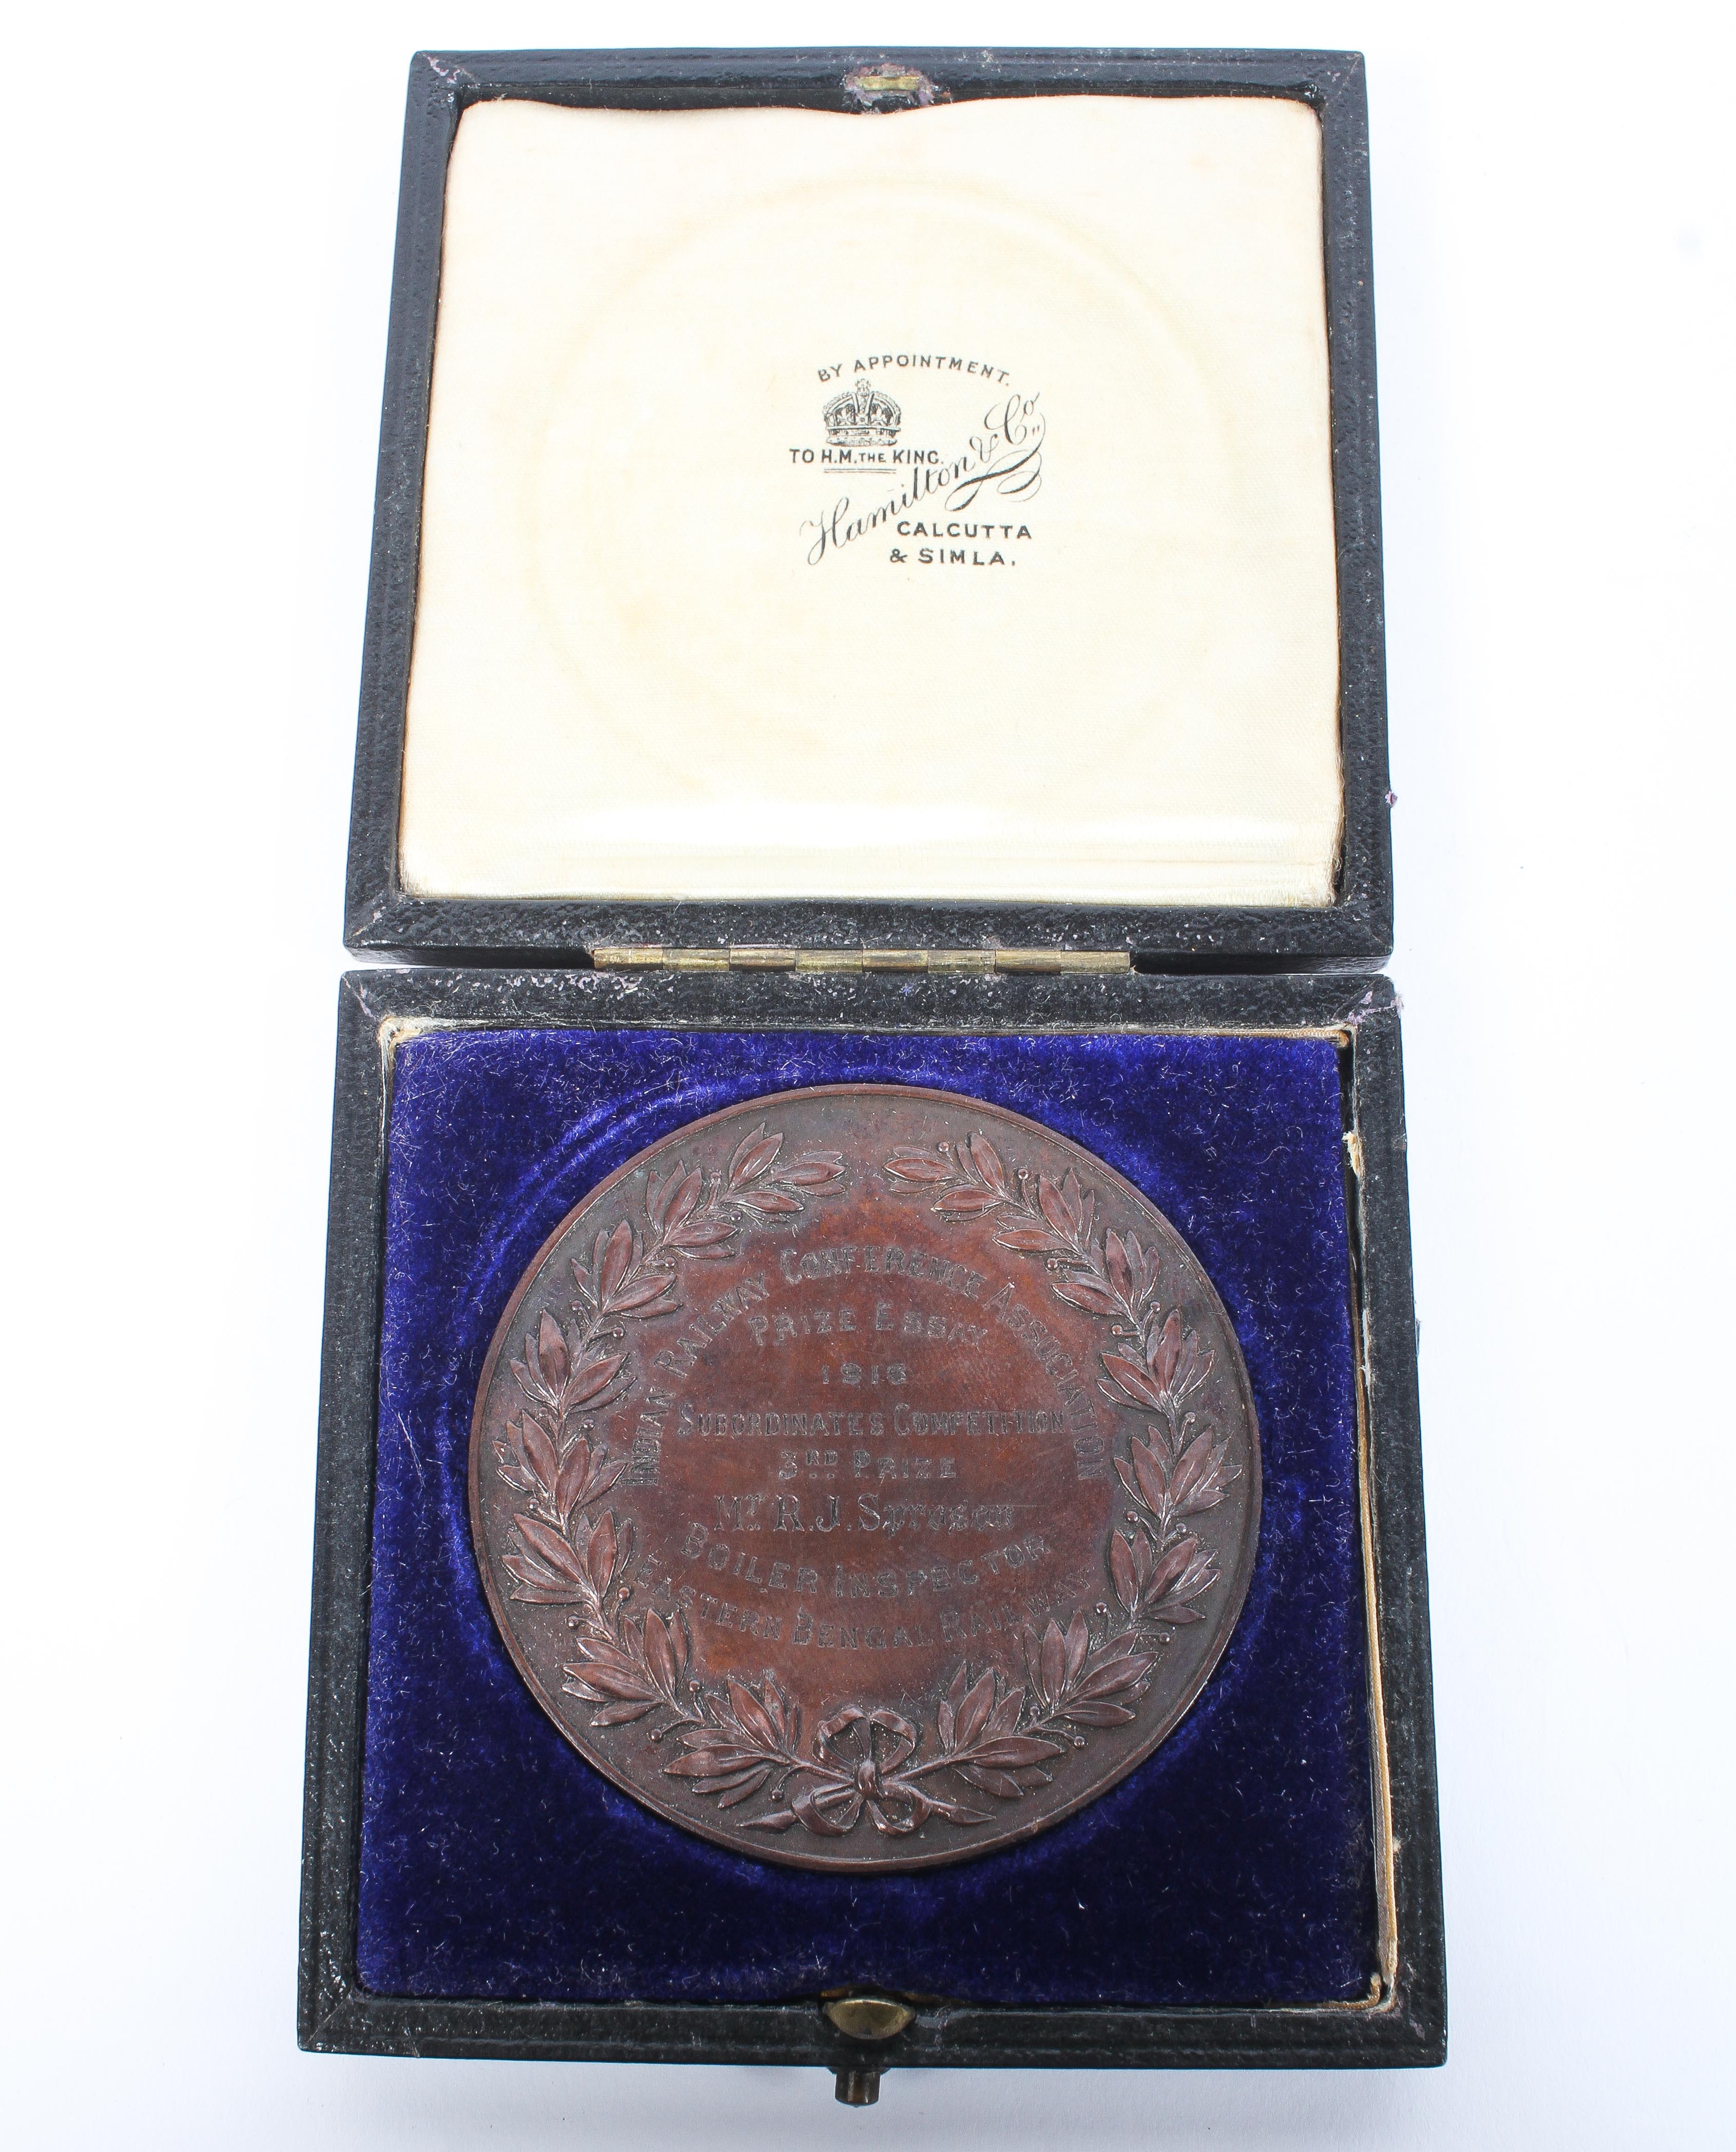 A bronze 3rd place medal struck for Indian Railway Conference Association.